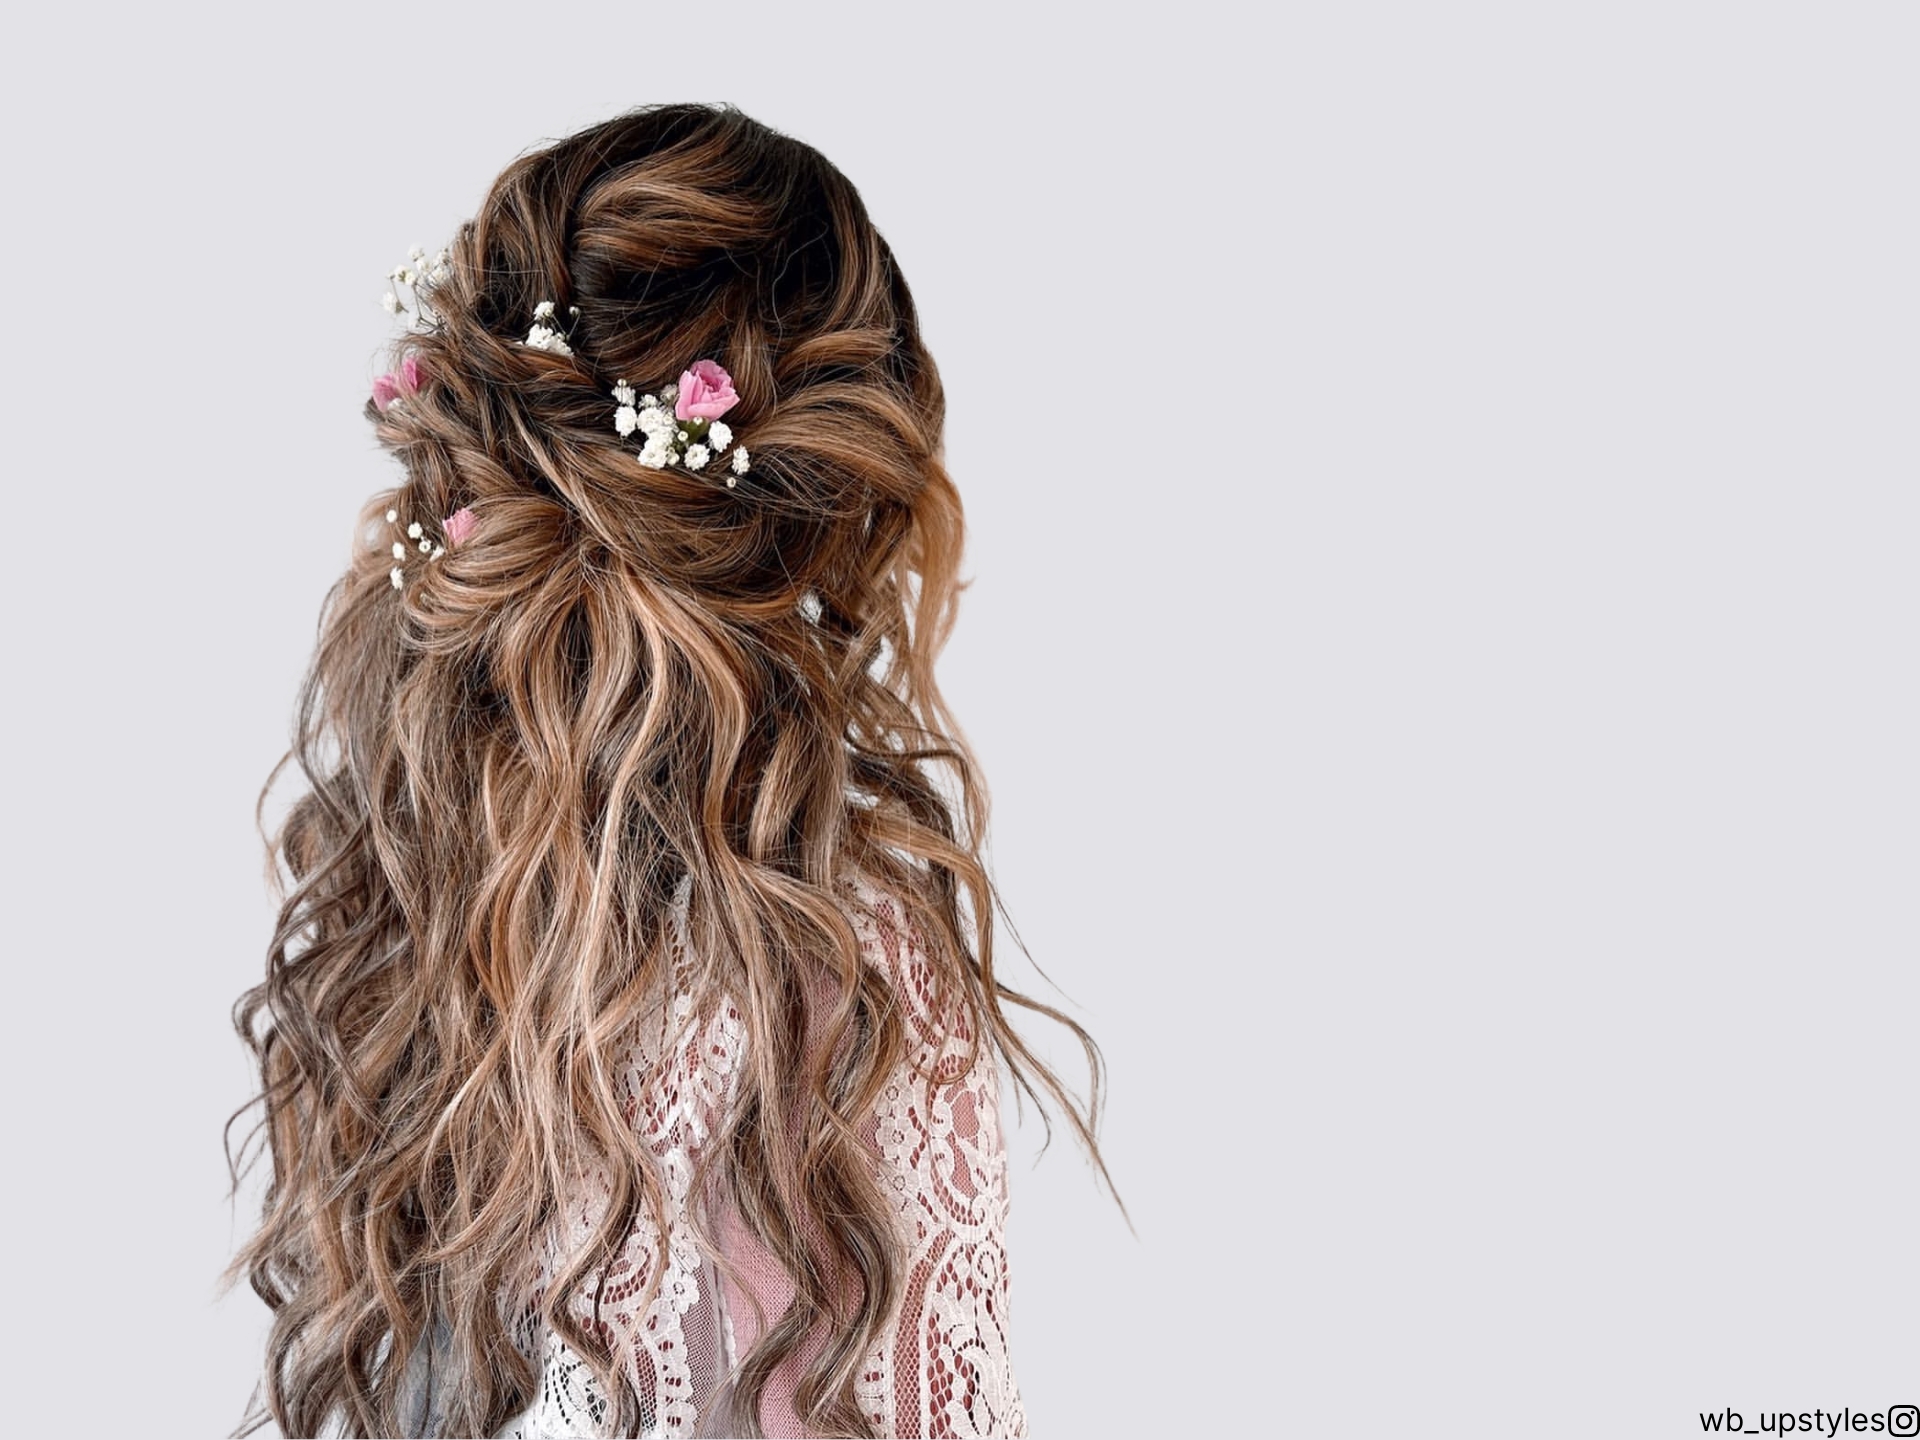 These Dreamy Boho Hairstyles Are Giving Wood Elf Vibes